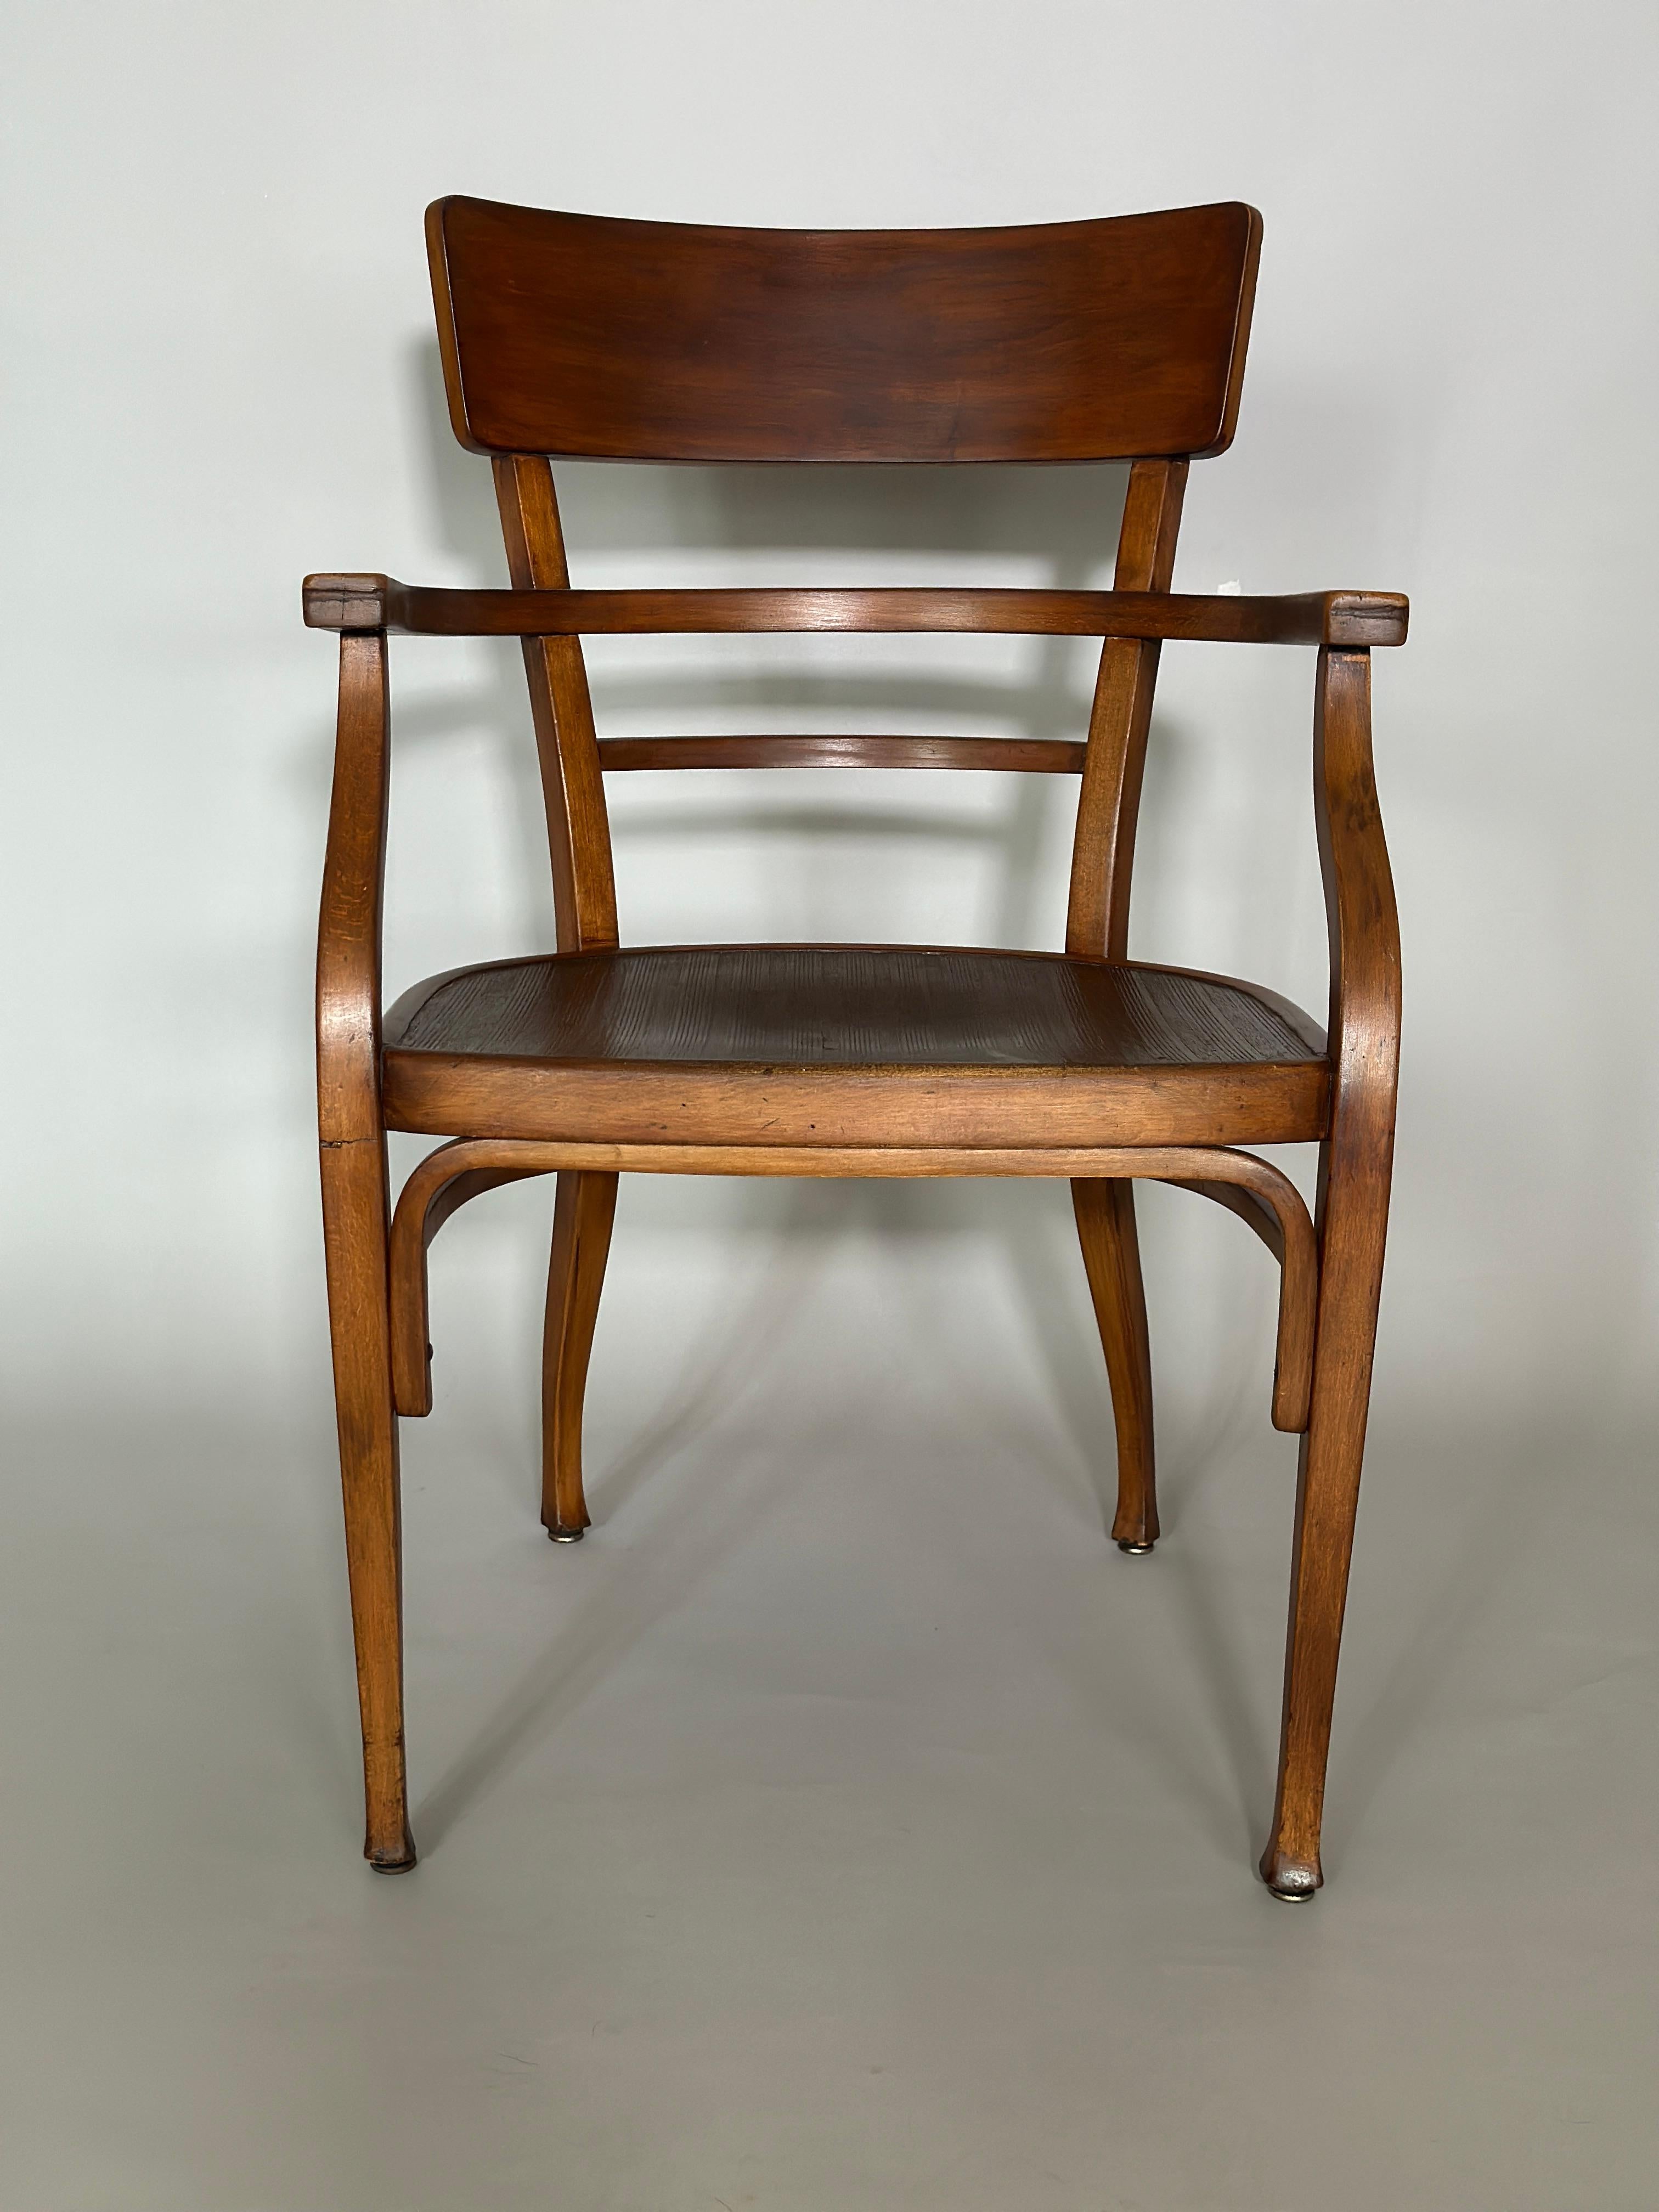 Thonet chair by Otto Wagner made in Austria 1900s.